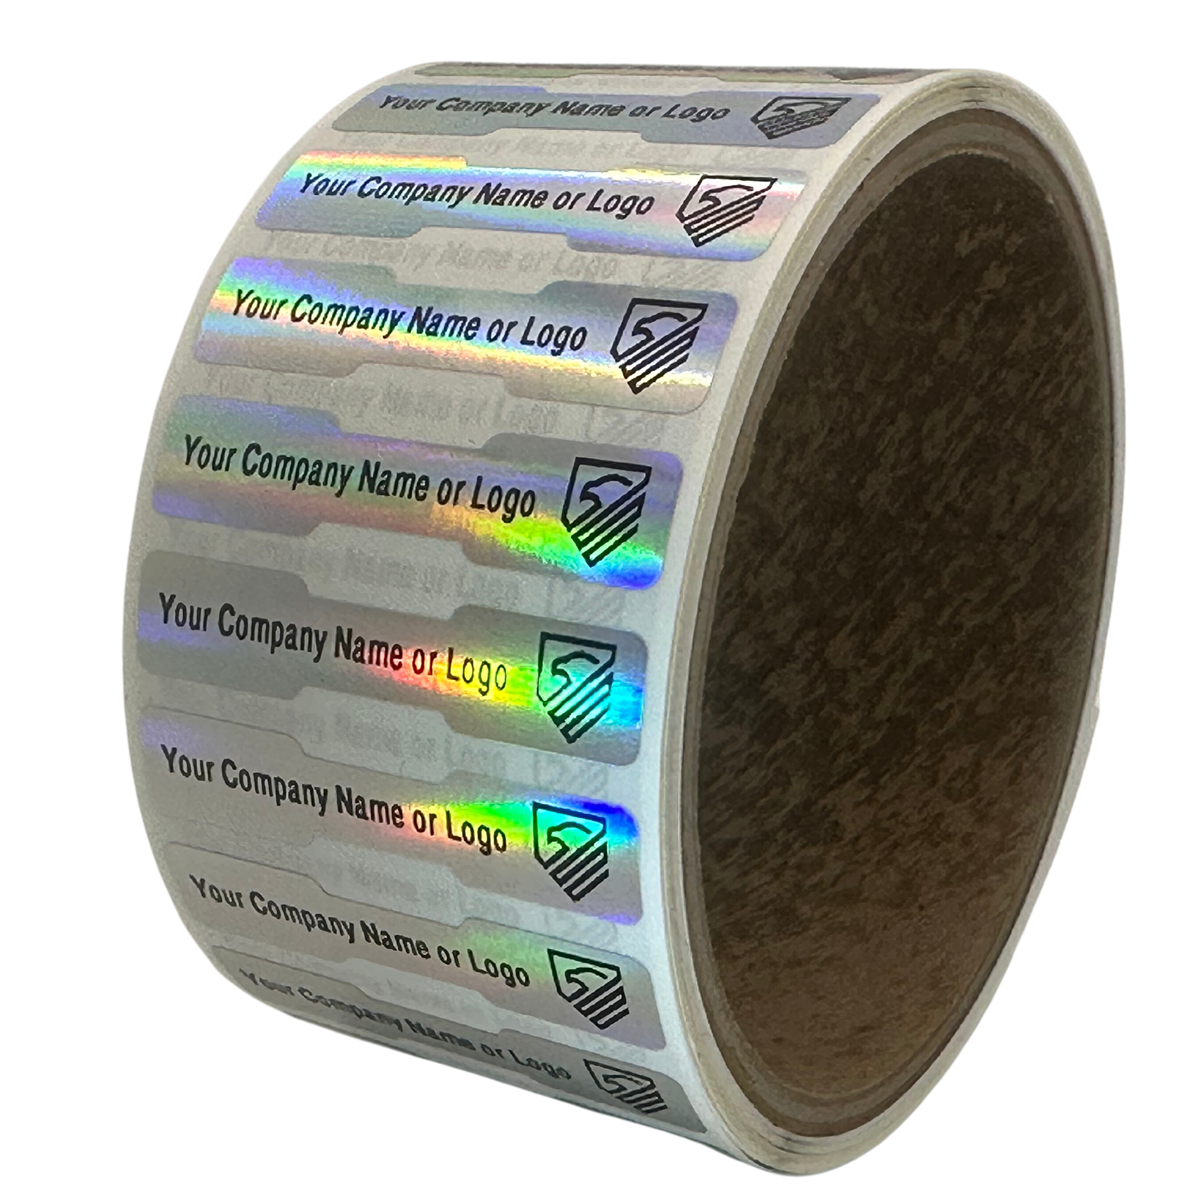 250 TamperColor Holographic Rainbow Color/ Finish Custom Printed Security Labels: Tamper Evident, Dogbone Shape Size 1.75" x 0.375 (44mm x 9mm) >Click on item details to customize.